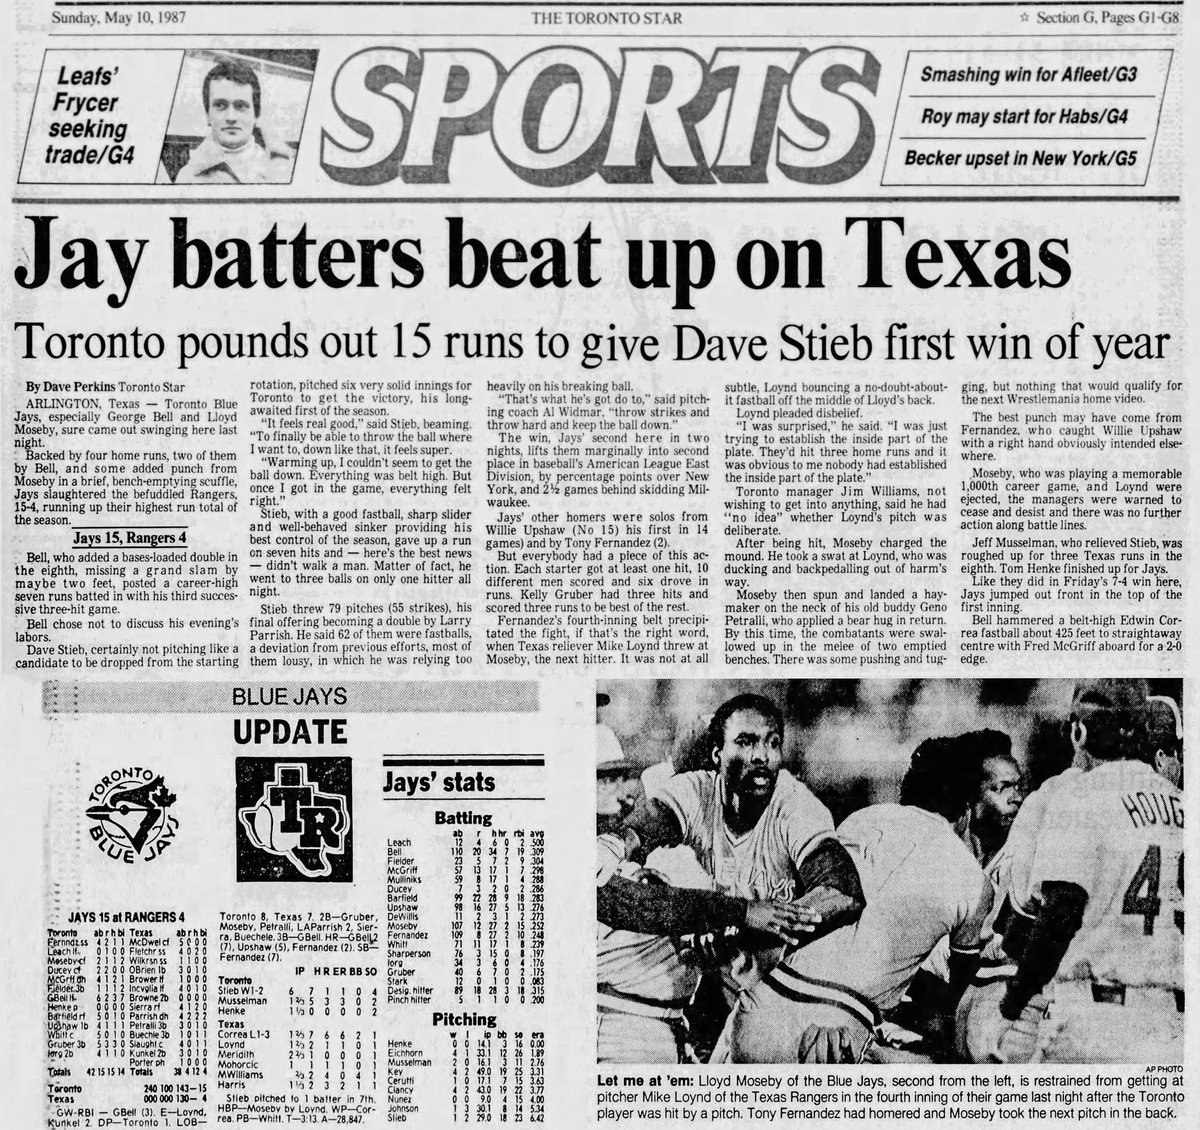 1/3: May 9, 1987 - Grounded in ‘86 by bone spurs, hounded by a rotten 0-2, 7.43 start to ‘87, Dave Stieb’s first crack at fixing himself takes root. He finally starts locating down. The #Rangers get lost trying to find him. Stieb’s line: 6IP 7H 1R 1ER 0BB 4K; GSc 58, RE24 2.67.